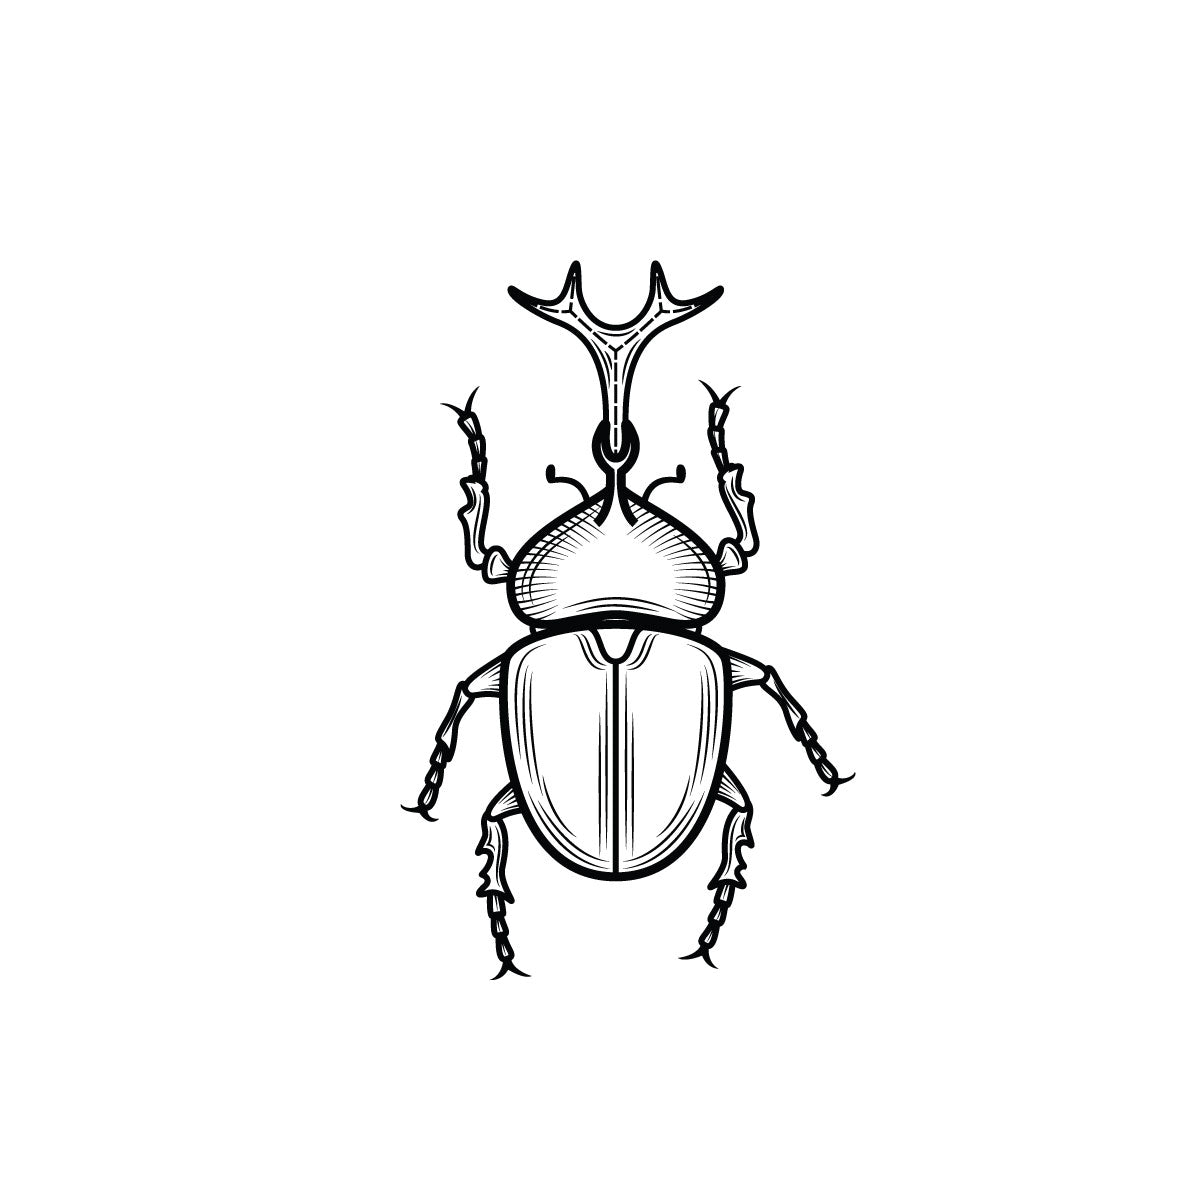 Dung-bettle temporary tattoo